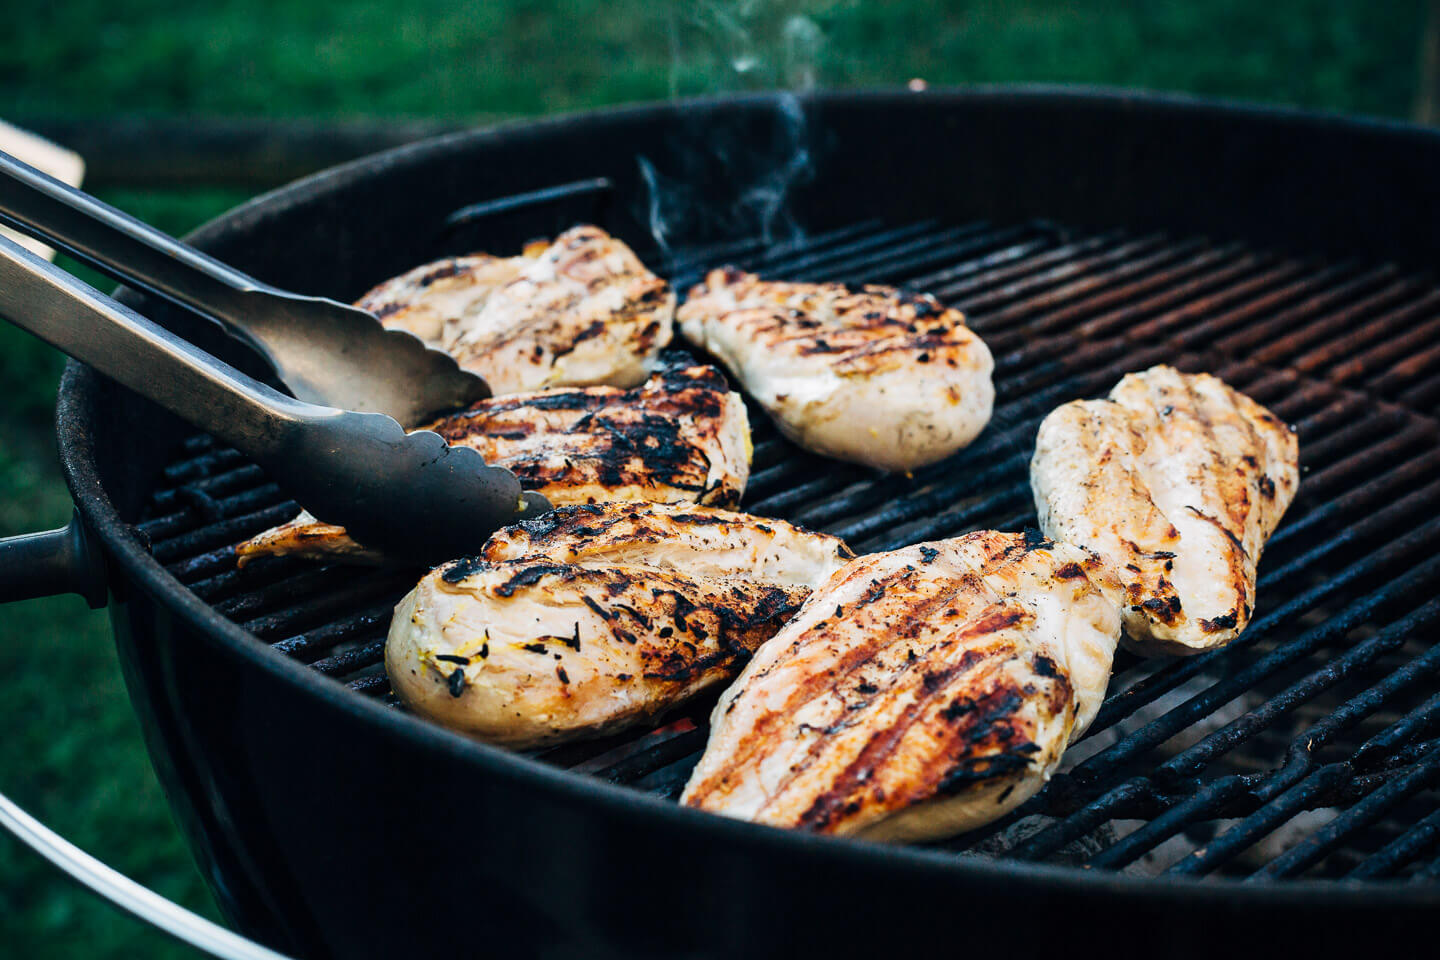 Farmer Focus chicken breasts on the grill.